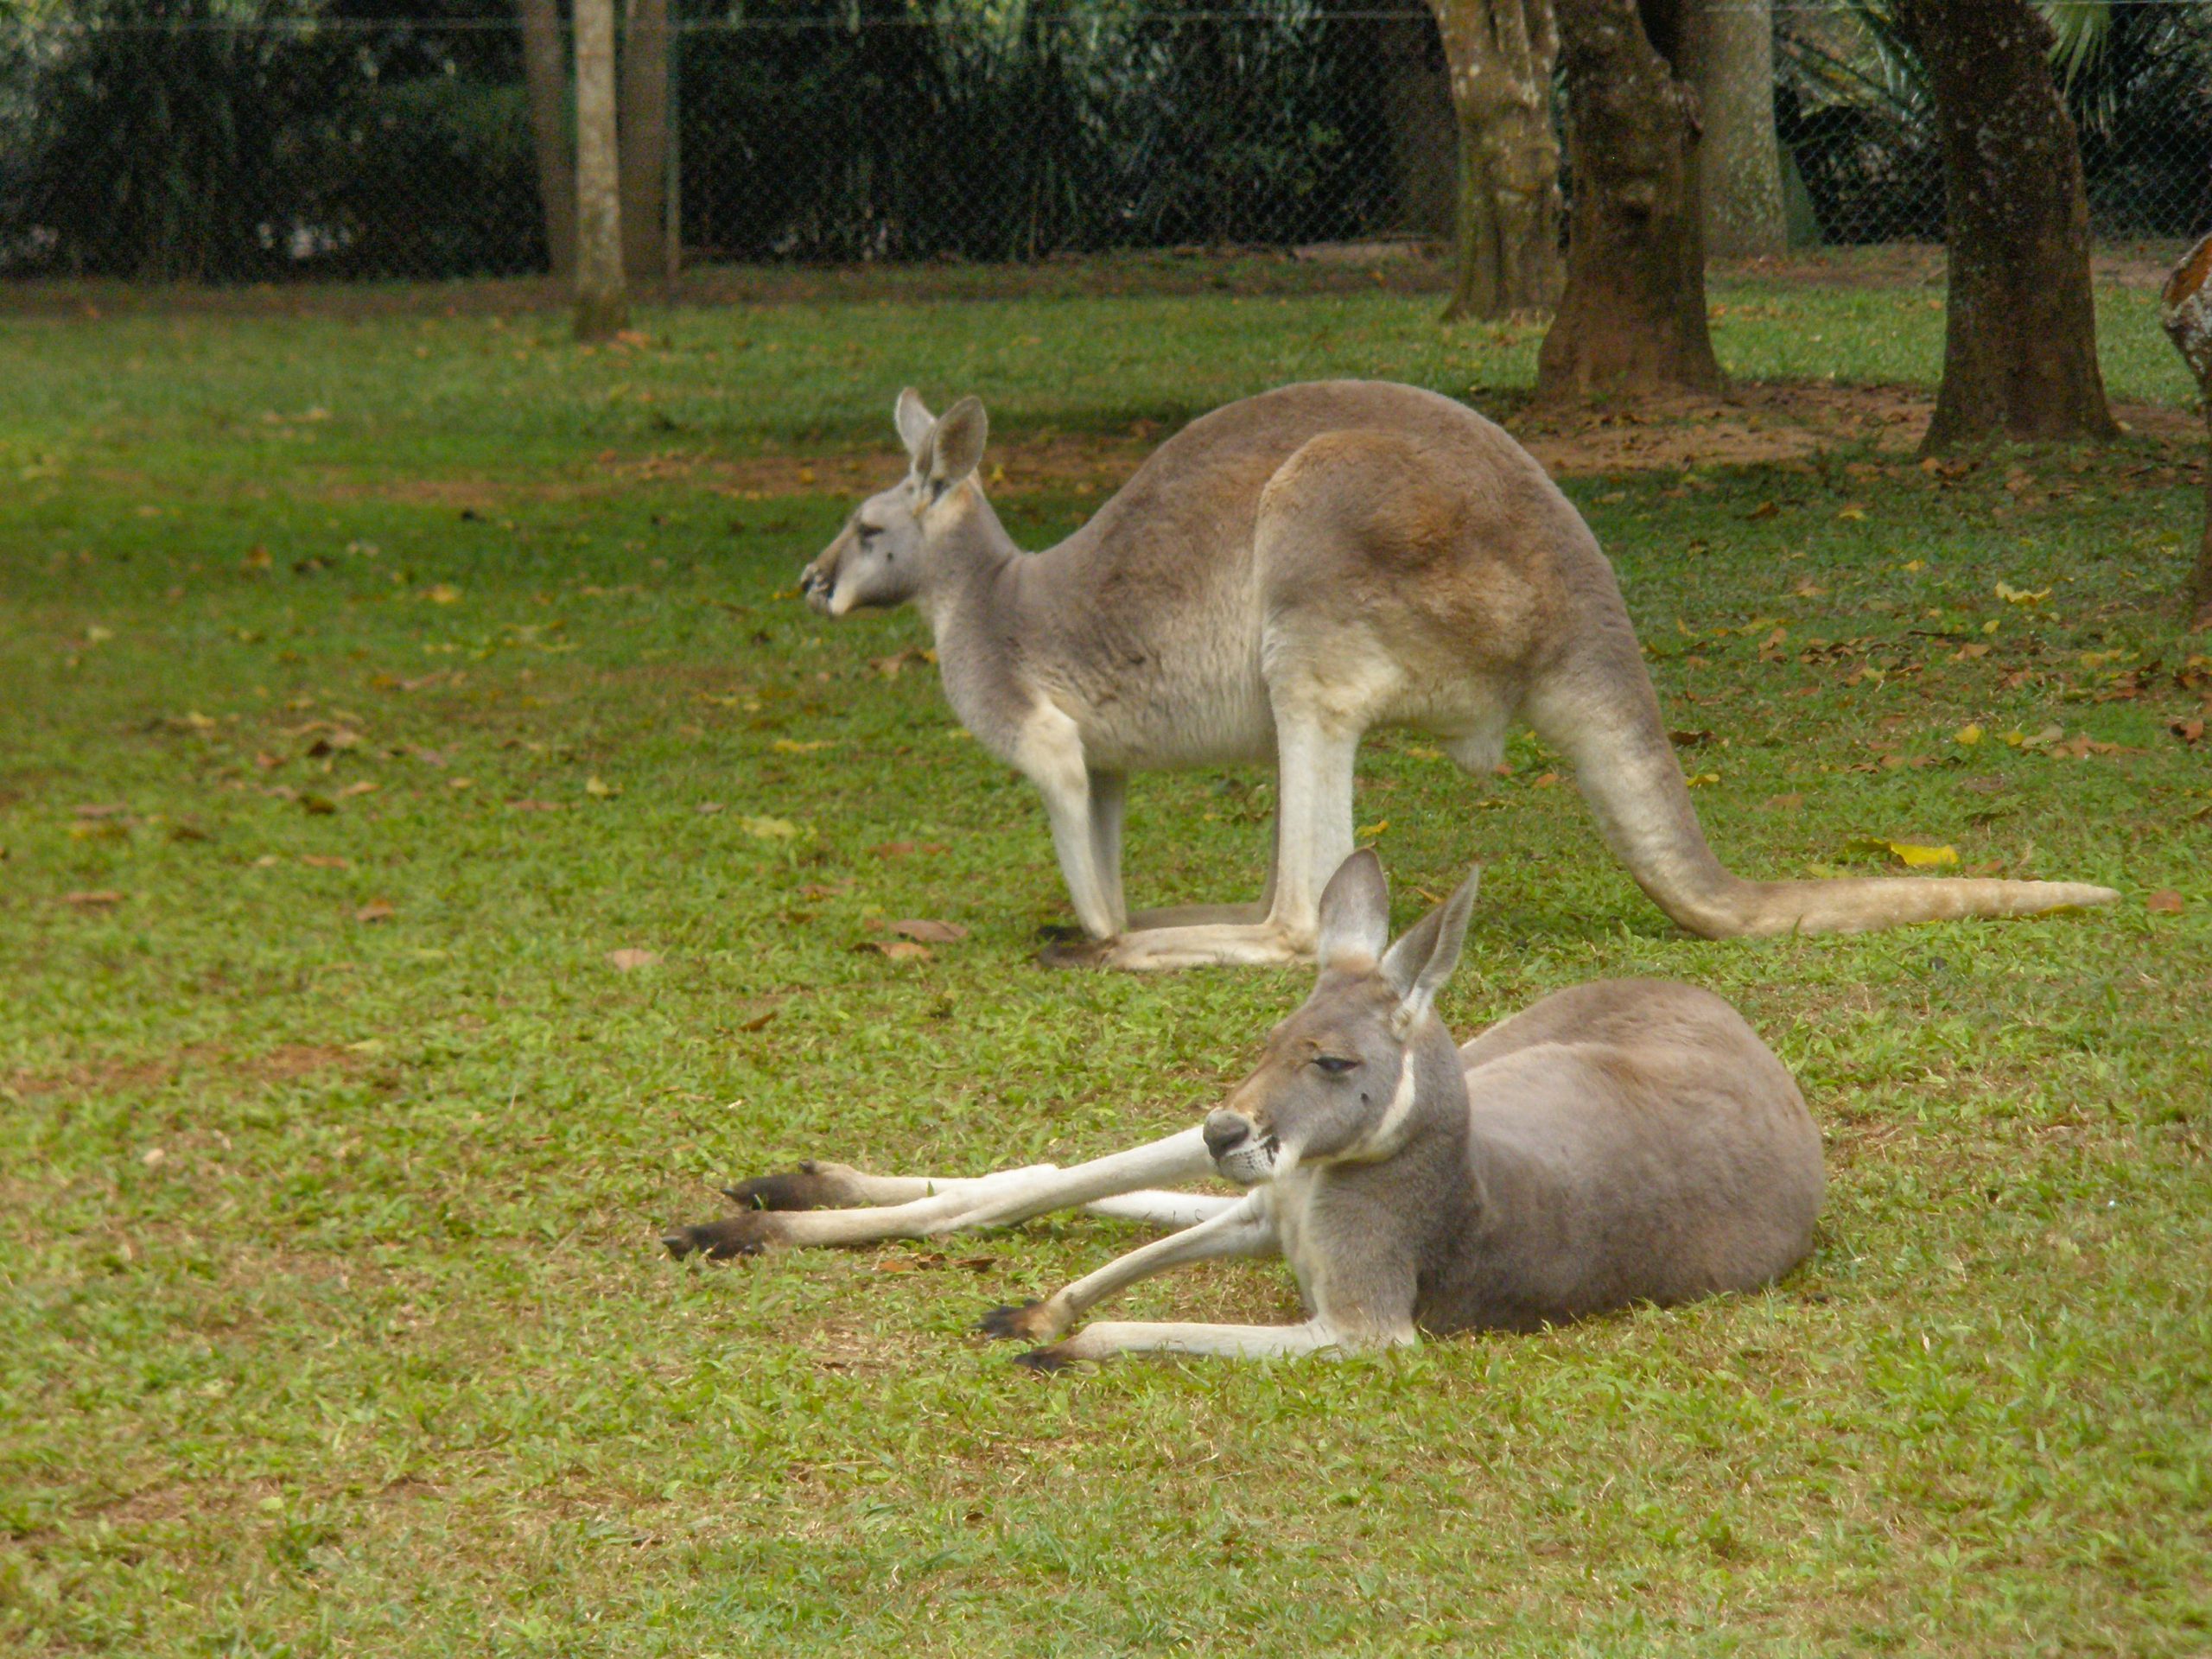 A pair of kangaroos at a nature reserve in Queensland